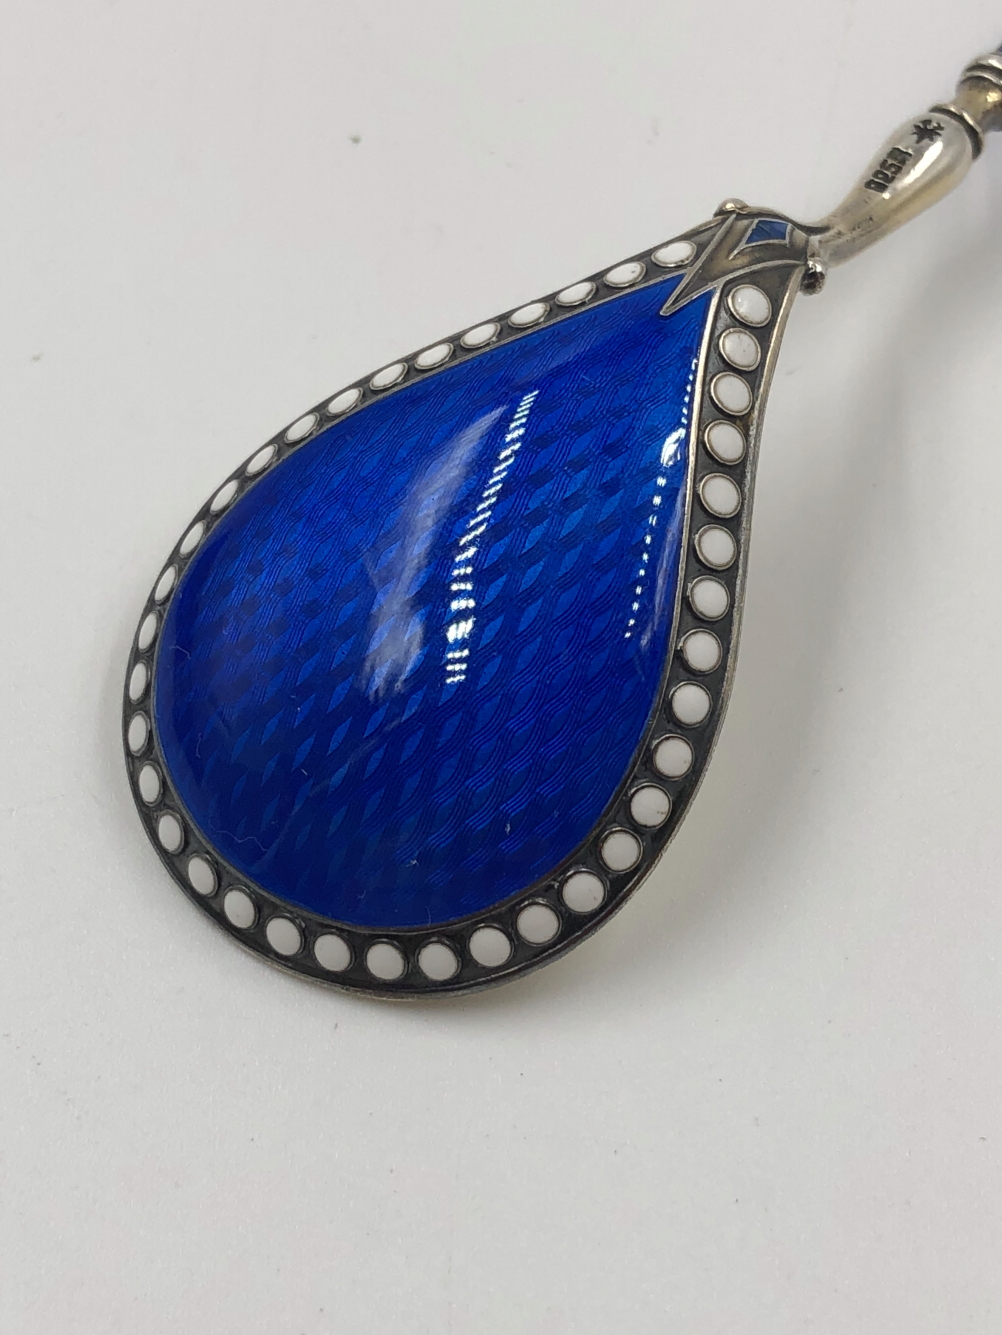 A NORWEGIAN 925 SILVER SPOON BASSE TAILLE ENAMELLED IN BLUE, THE BACK OF THE BOWL EDGED WITH WHITE - Image 2 of 11